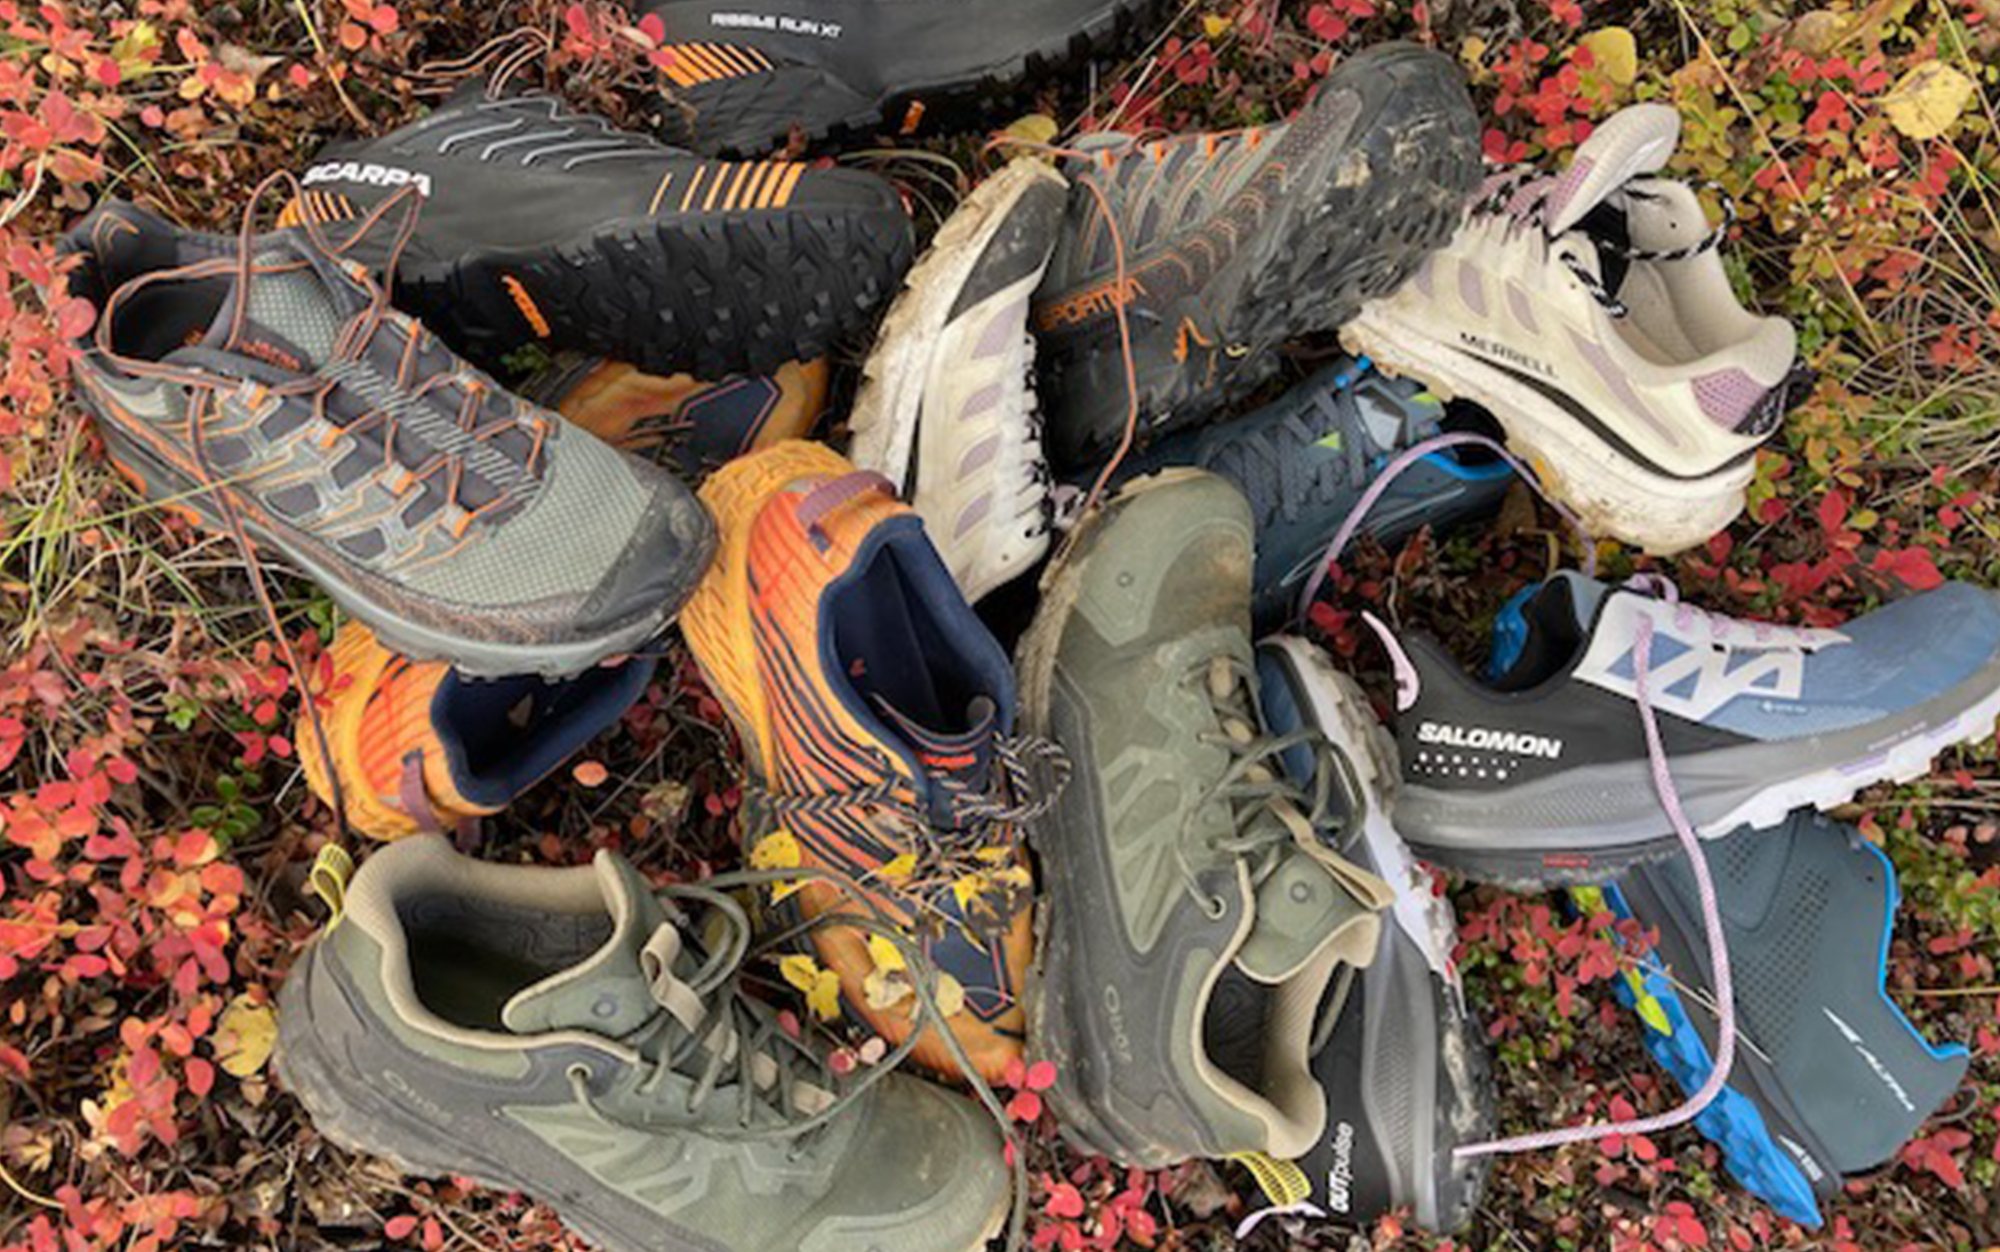 The best lihgtweight hiking shoes sit in a pile.